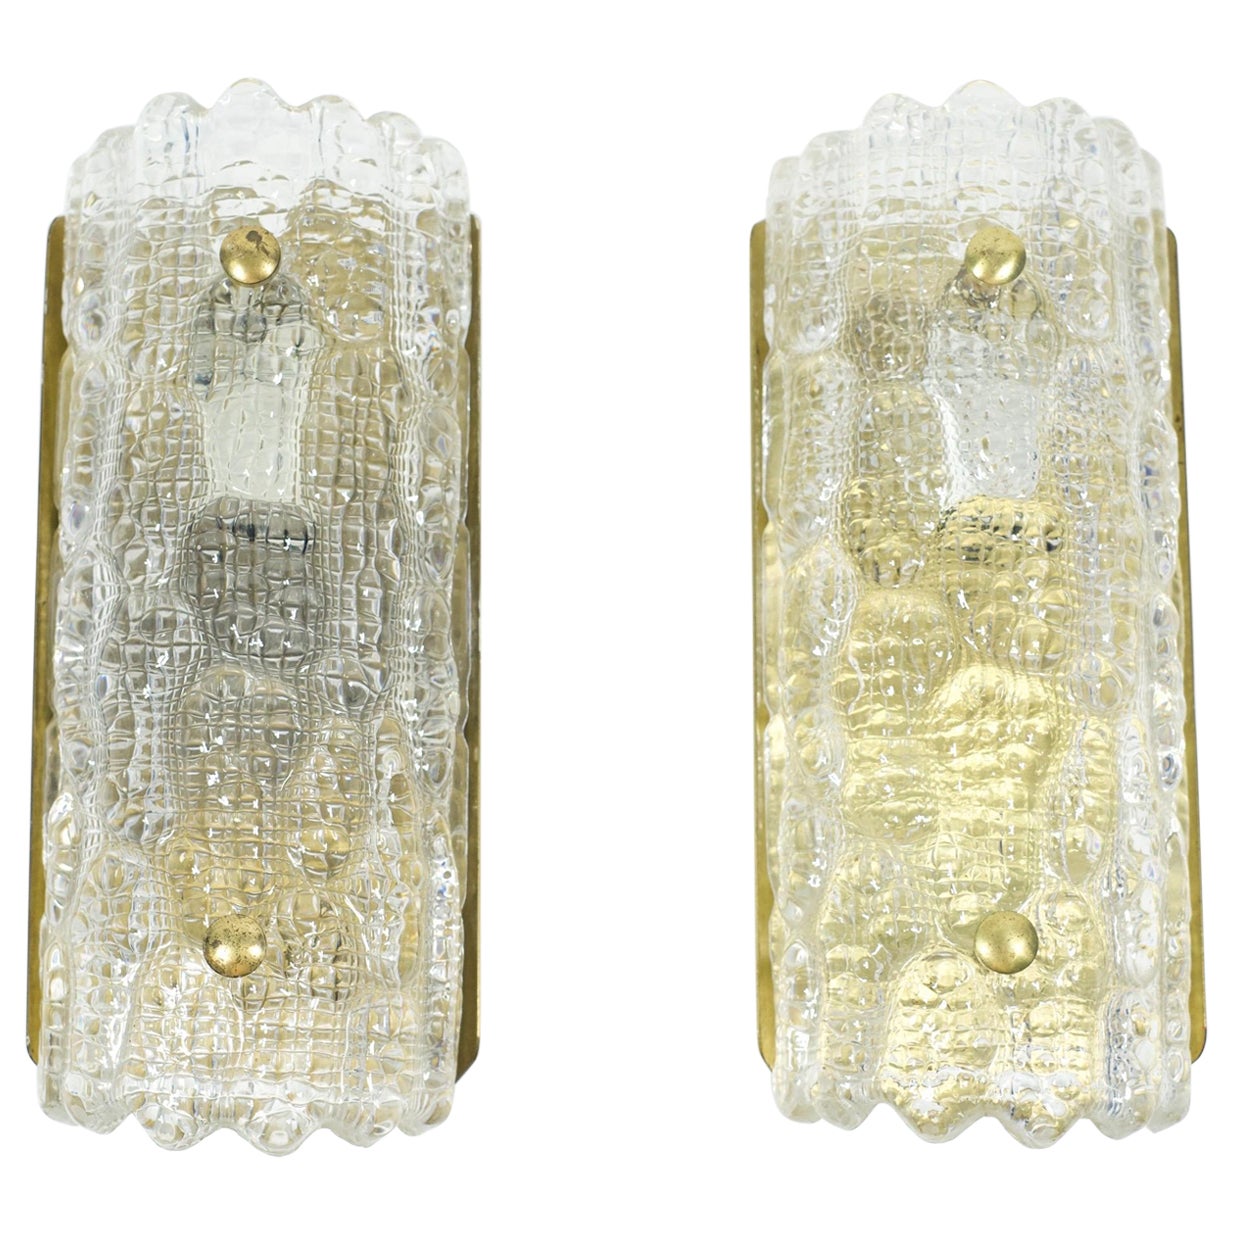 Pair of Orrefors Sconces Brass and Crystal Glass Shades by Orrefors Sweden, 1970